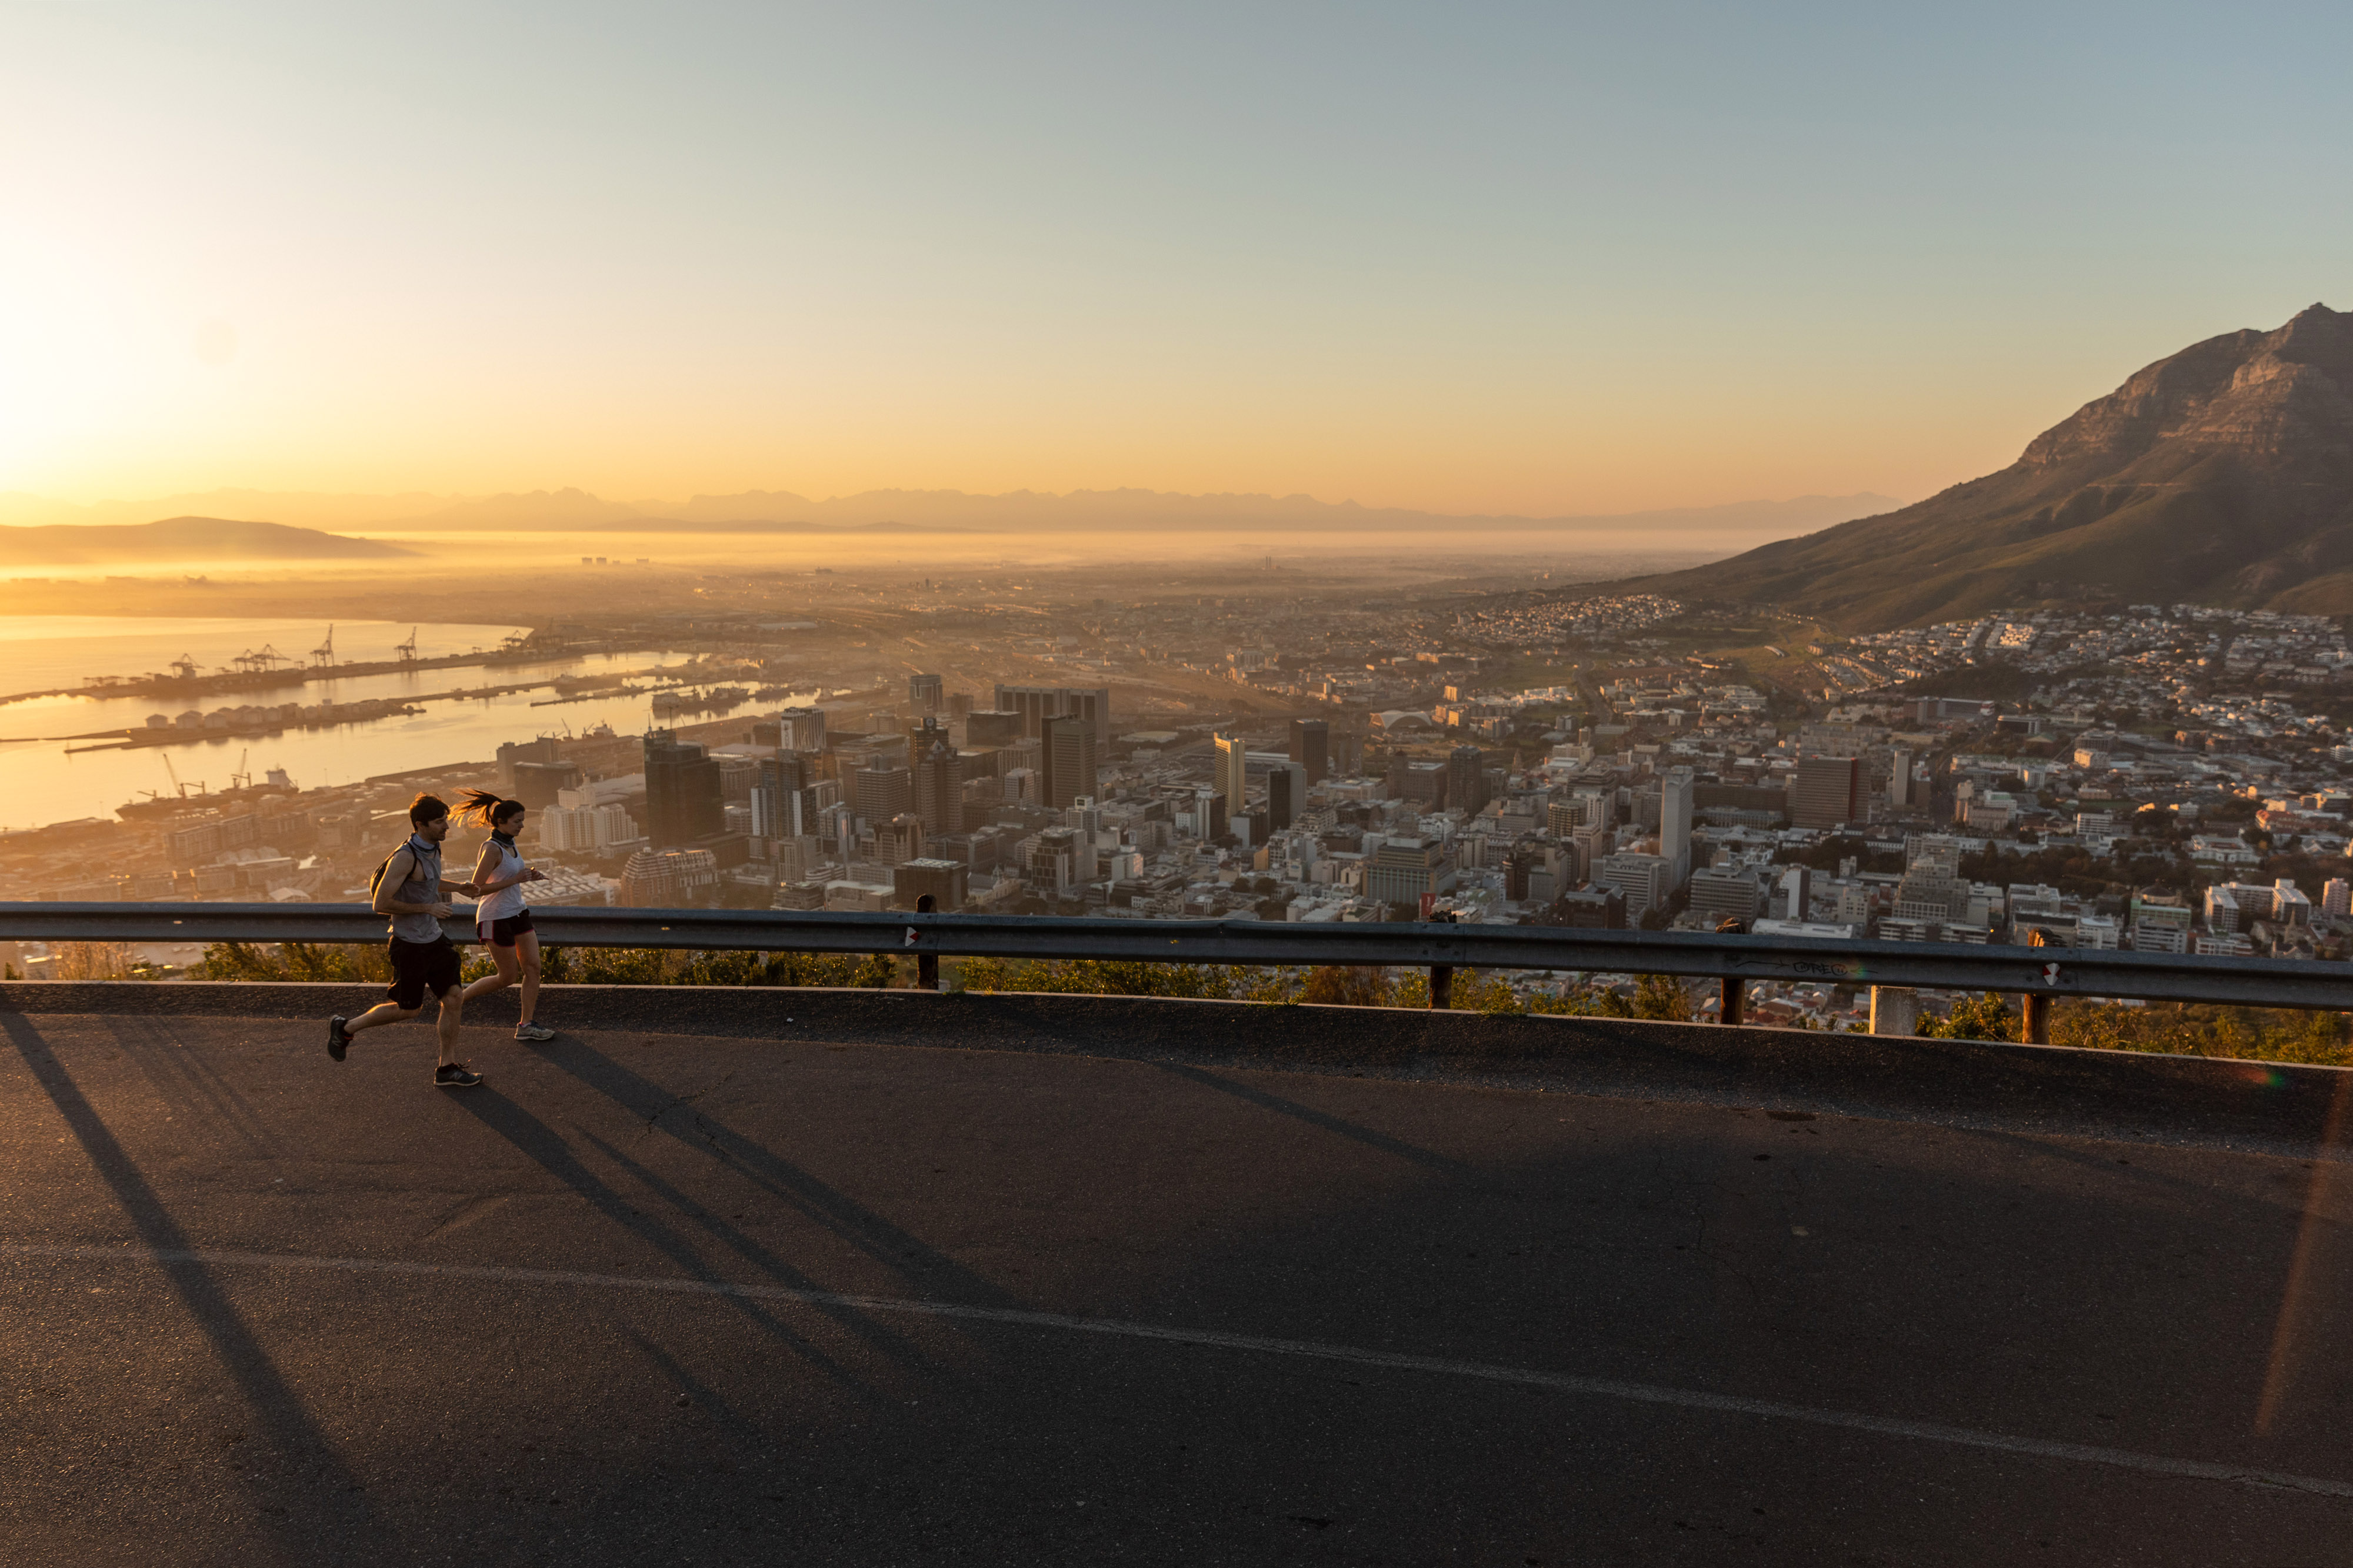 Joggers make their way up a hill as the port area and commercial high-rise properties stand at the foot of Table mountain as the sun rises in Cape Town, South Africa, on Thursday, July 23, 2020. South Africas surging coronavirus infections and the resumption of rolling blackouts are clouding the outlook for the economy. Photographer: Dwayne Senior/Bloomberg via Getty Images